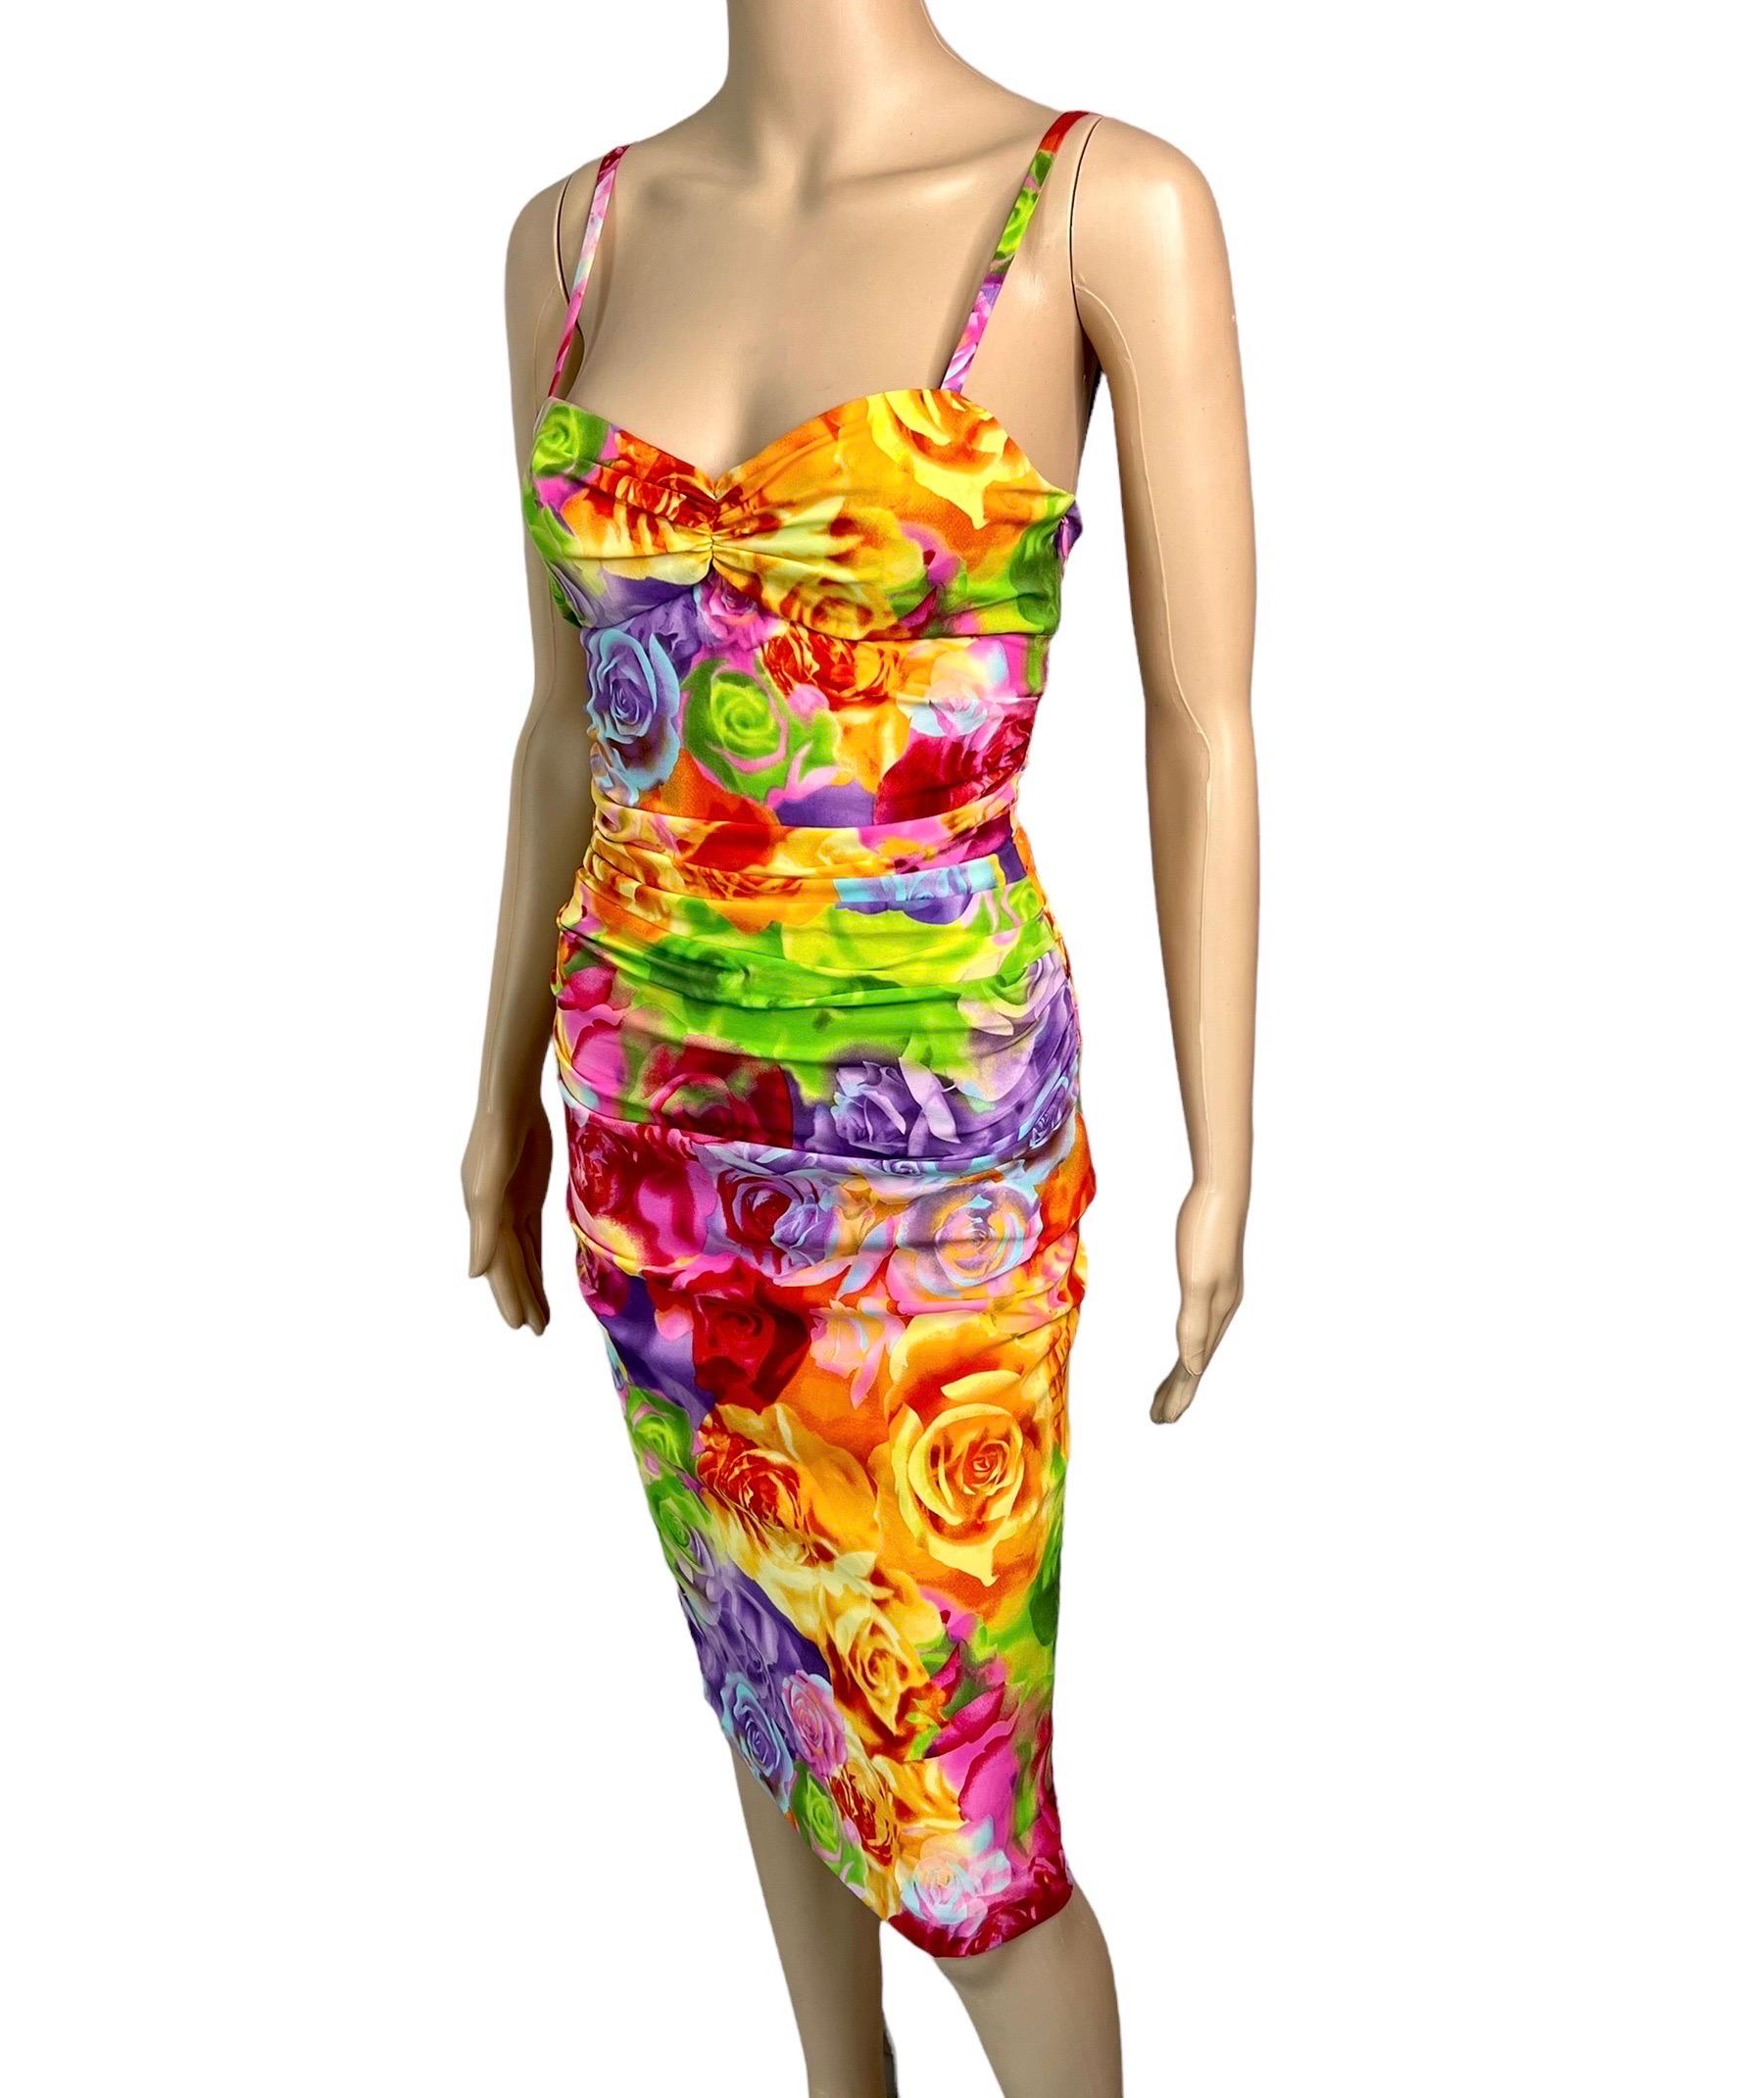 Versace S/S 2005 Bustier Bra Floral Print Bodycon Ruched Dress For Sale 2